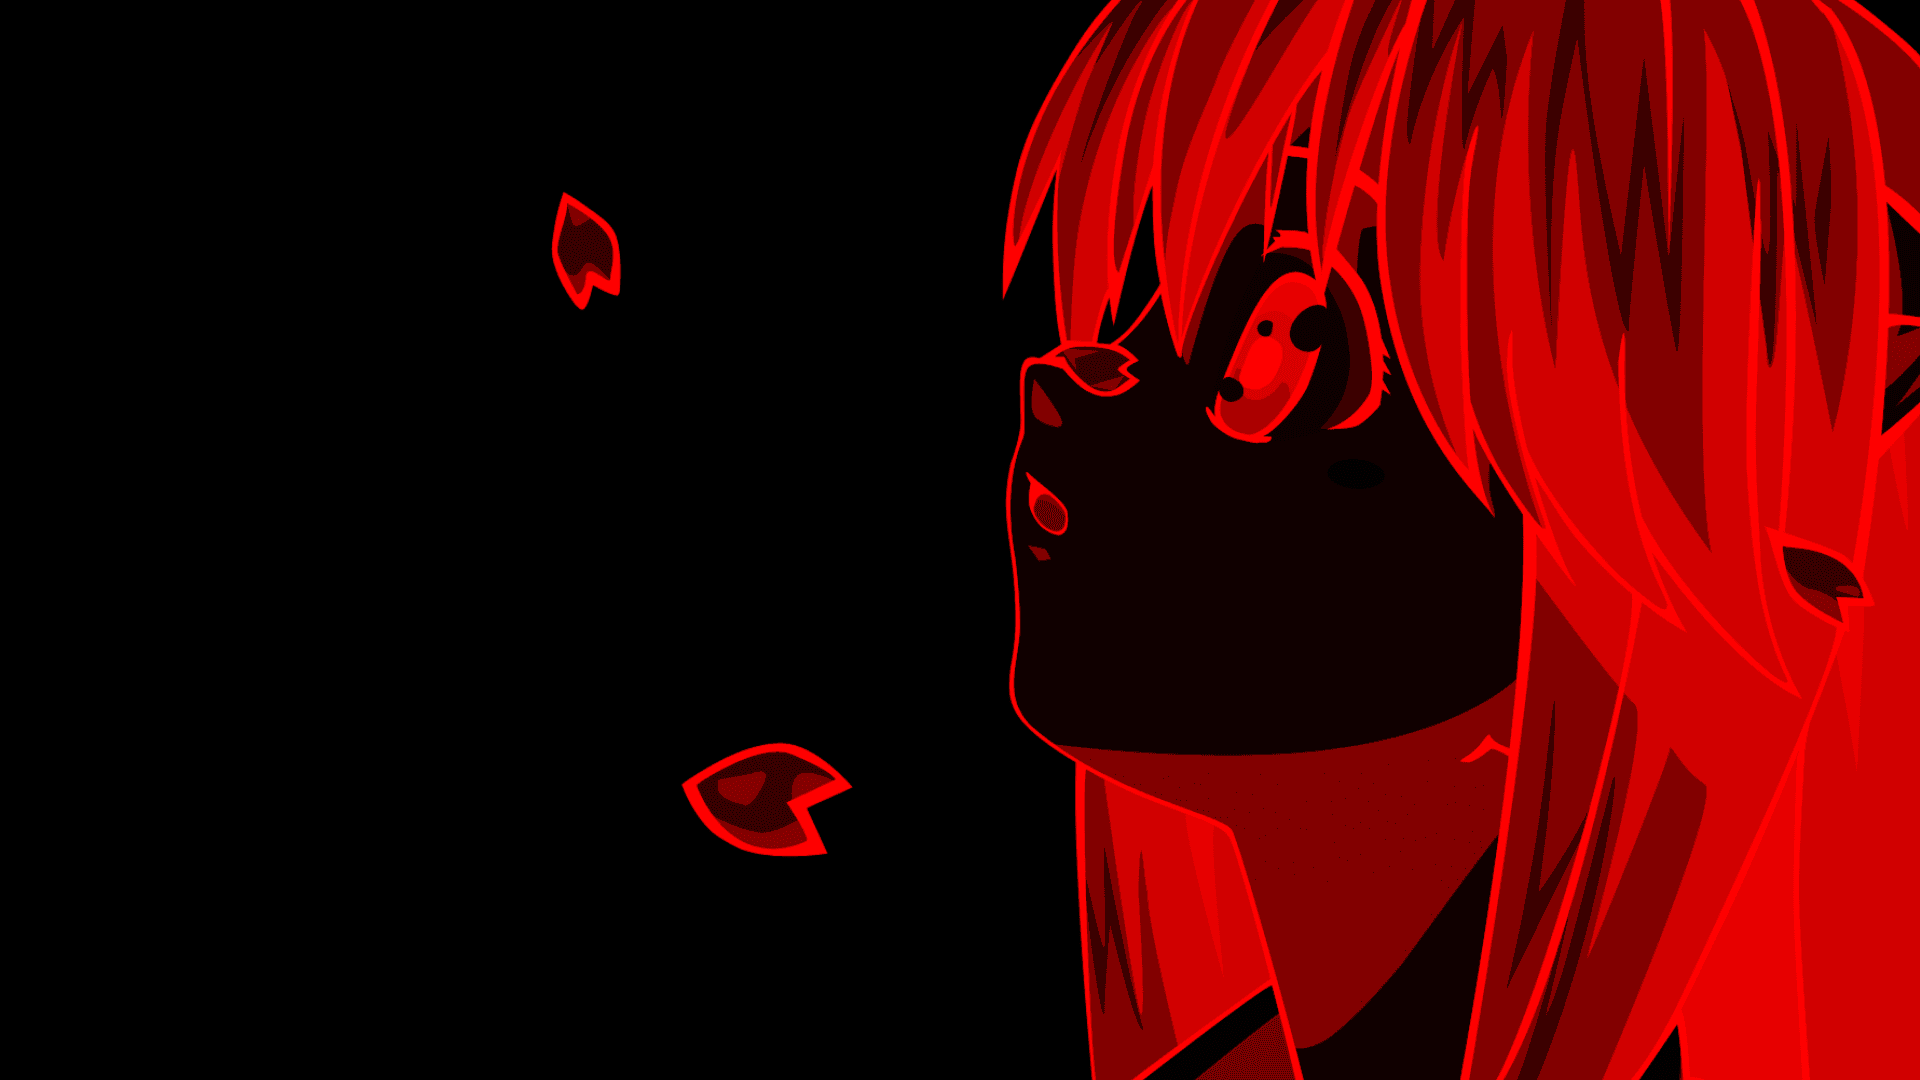 Intricate And Dramatic Illustration From Elfen Lied Anime Series